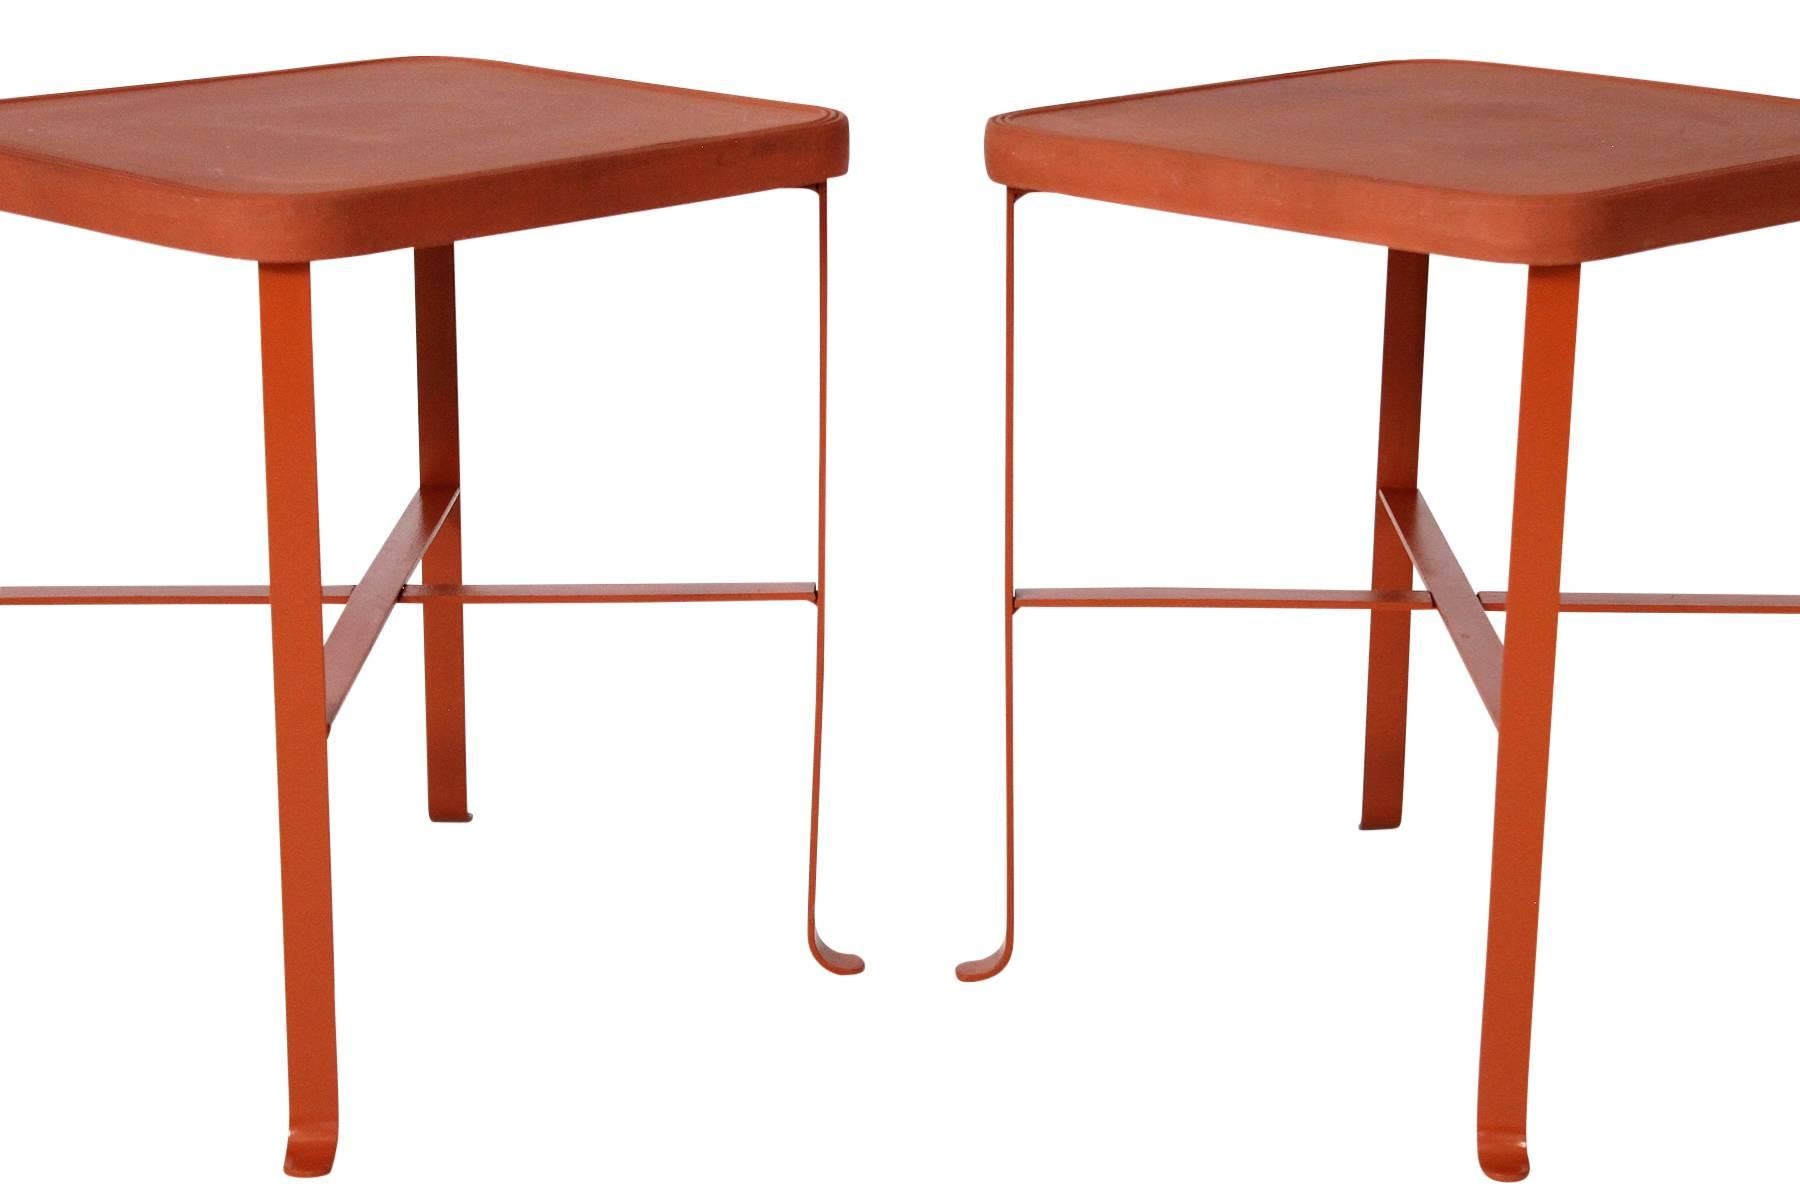 Metal Pair of Tables by Bennington Potters